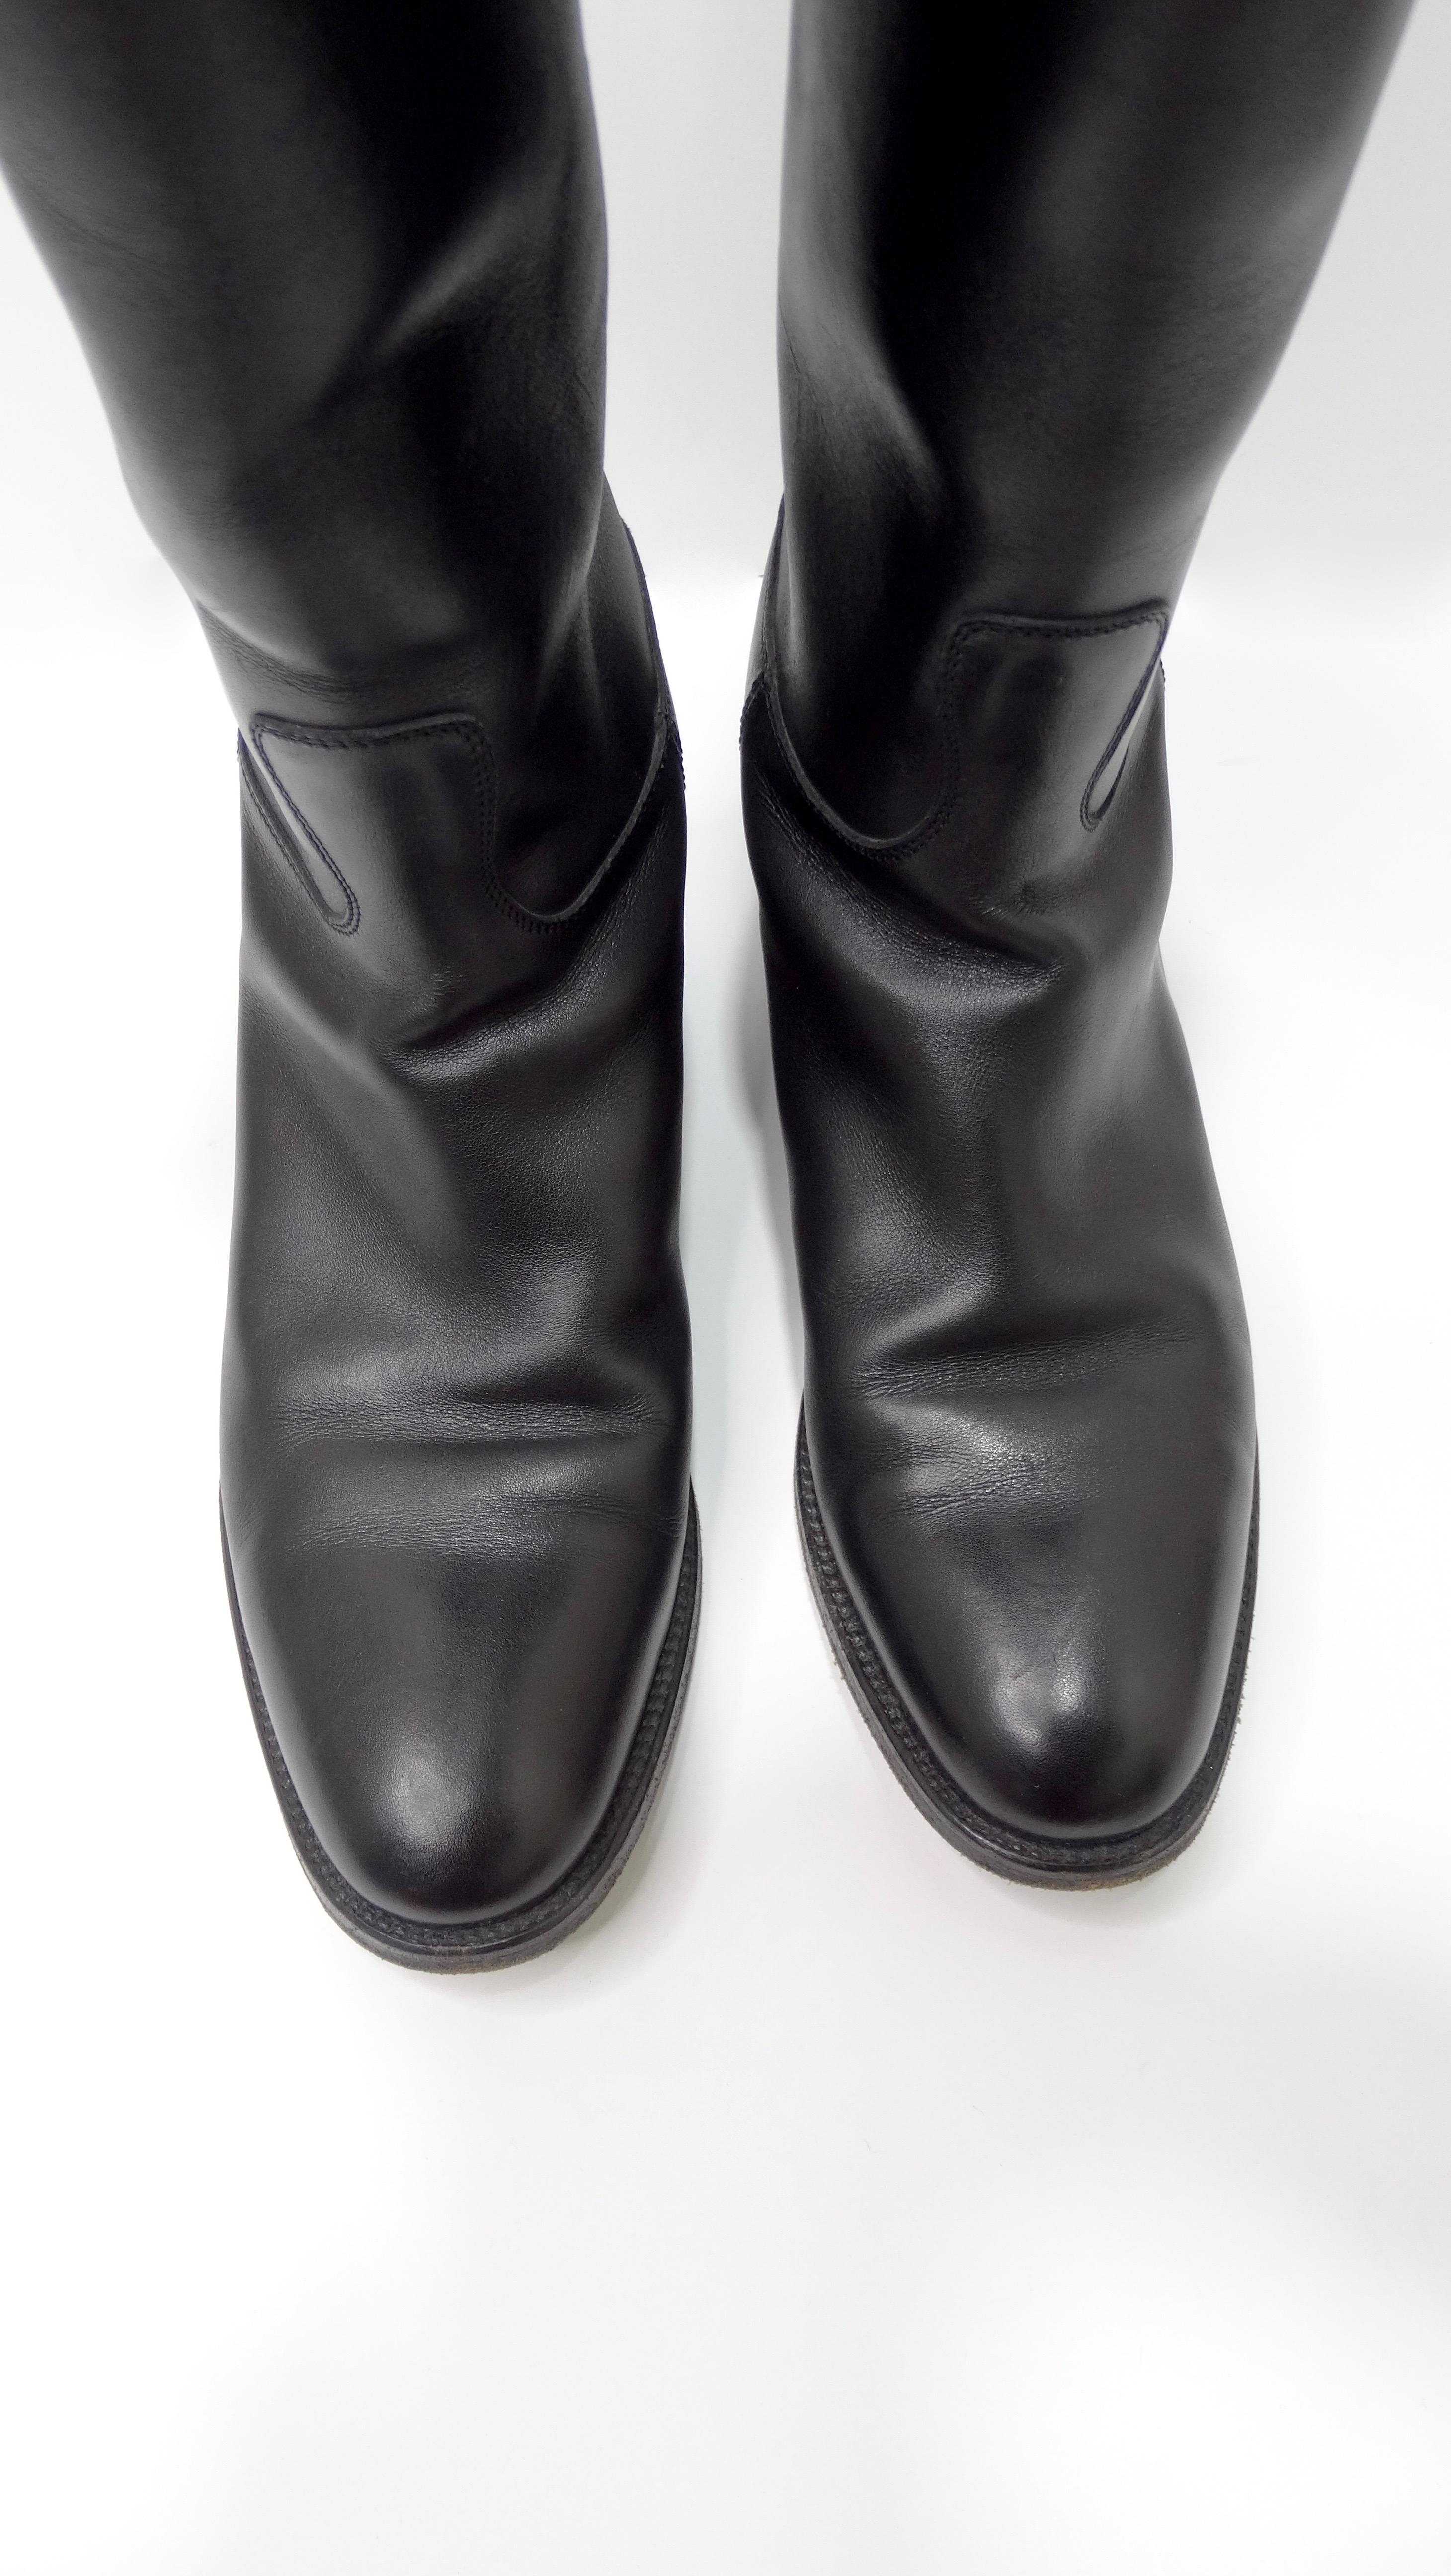 hermes riding boots